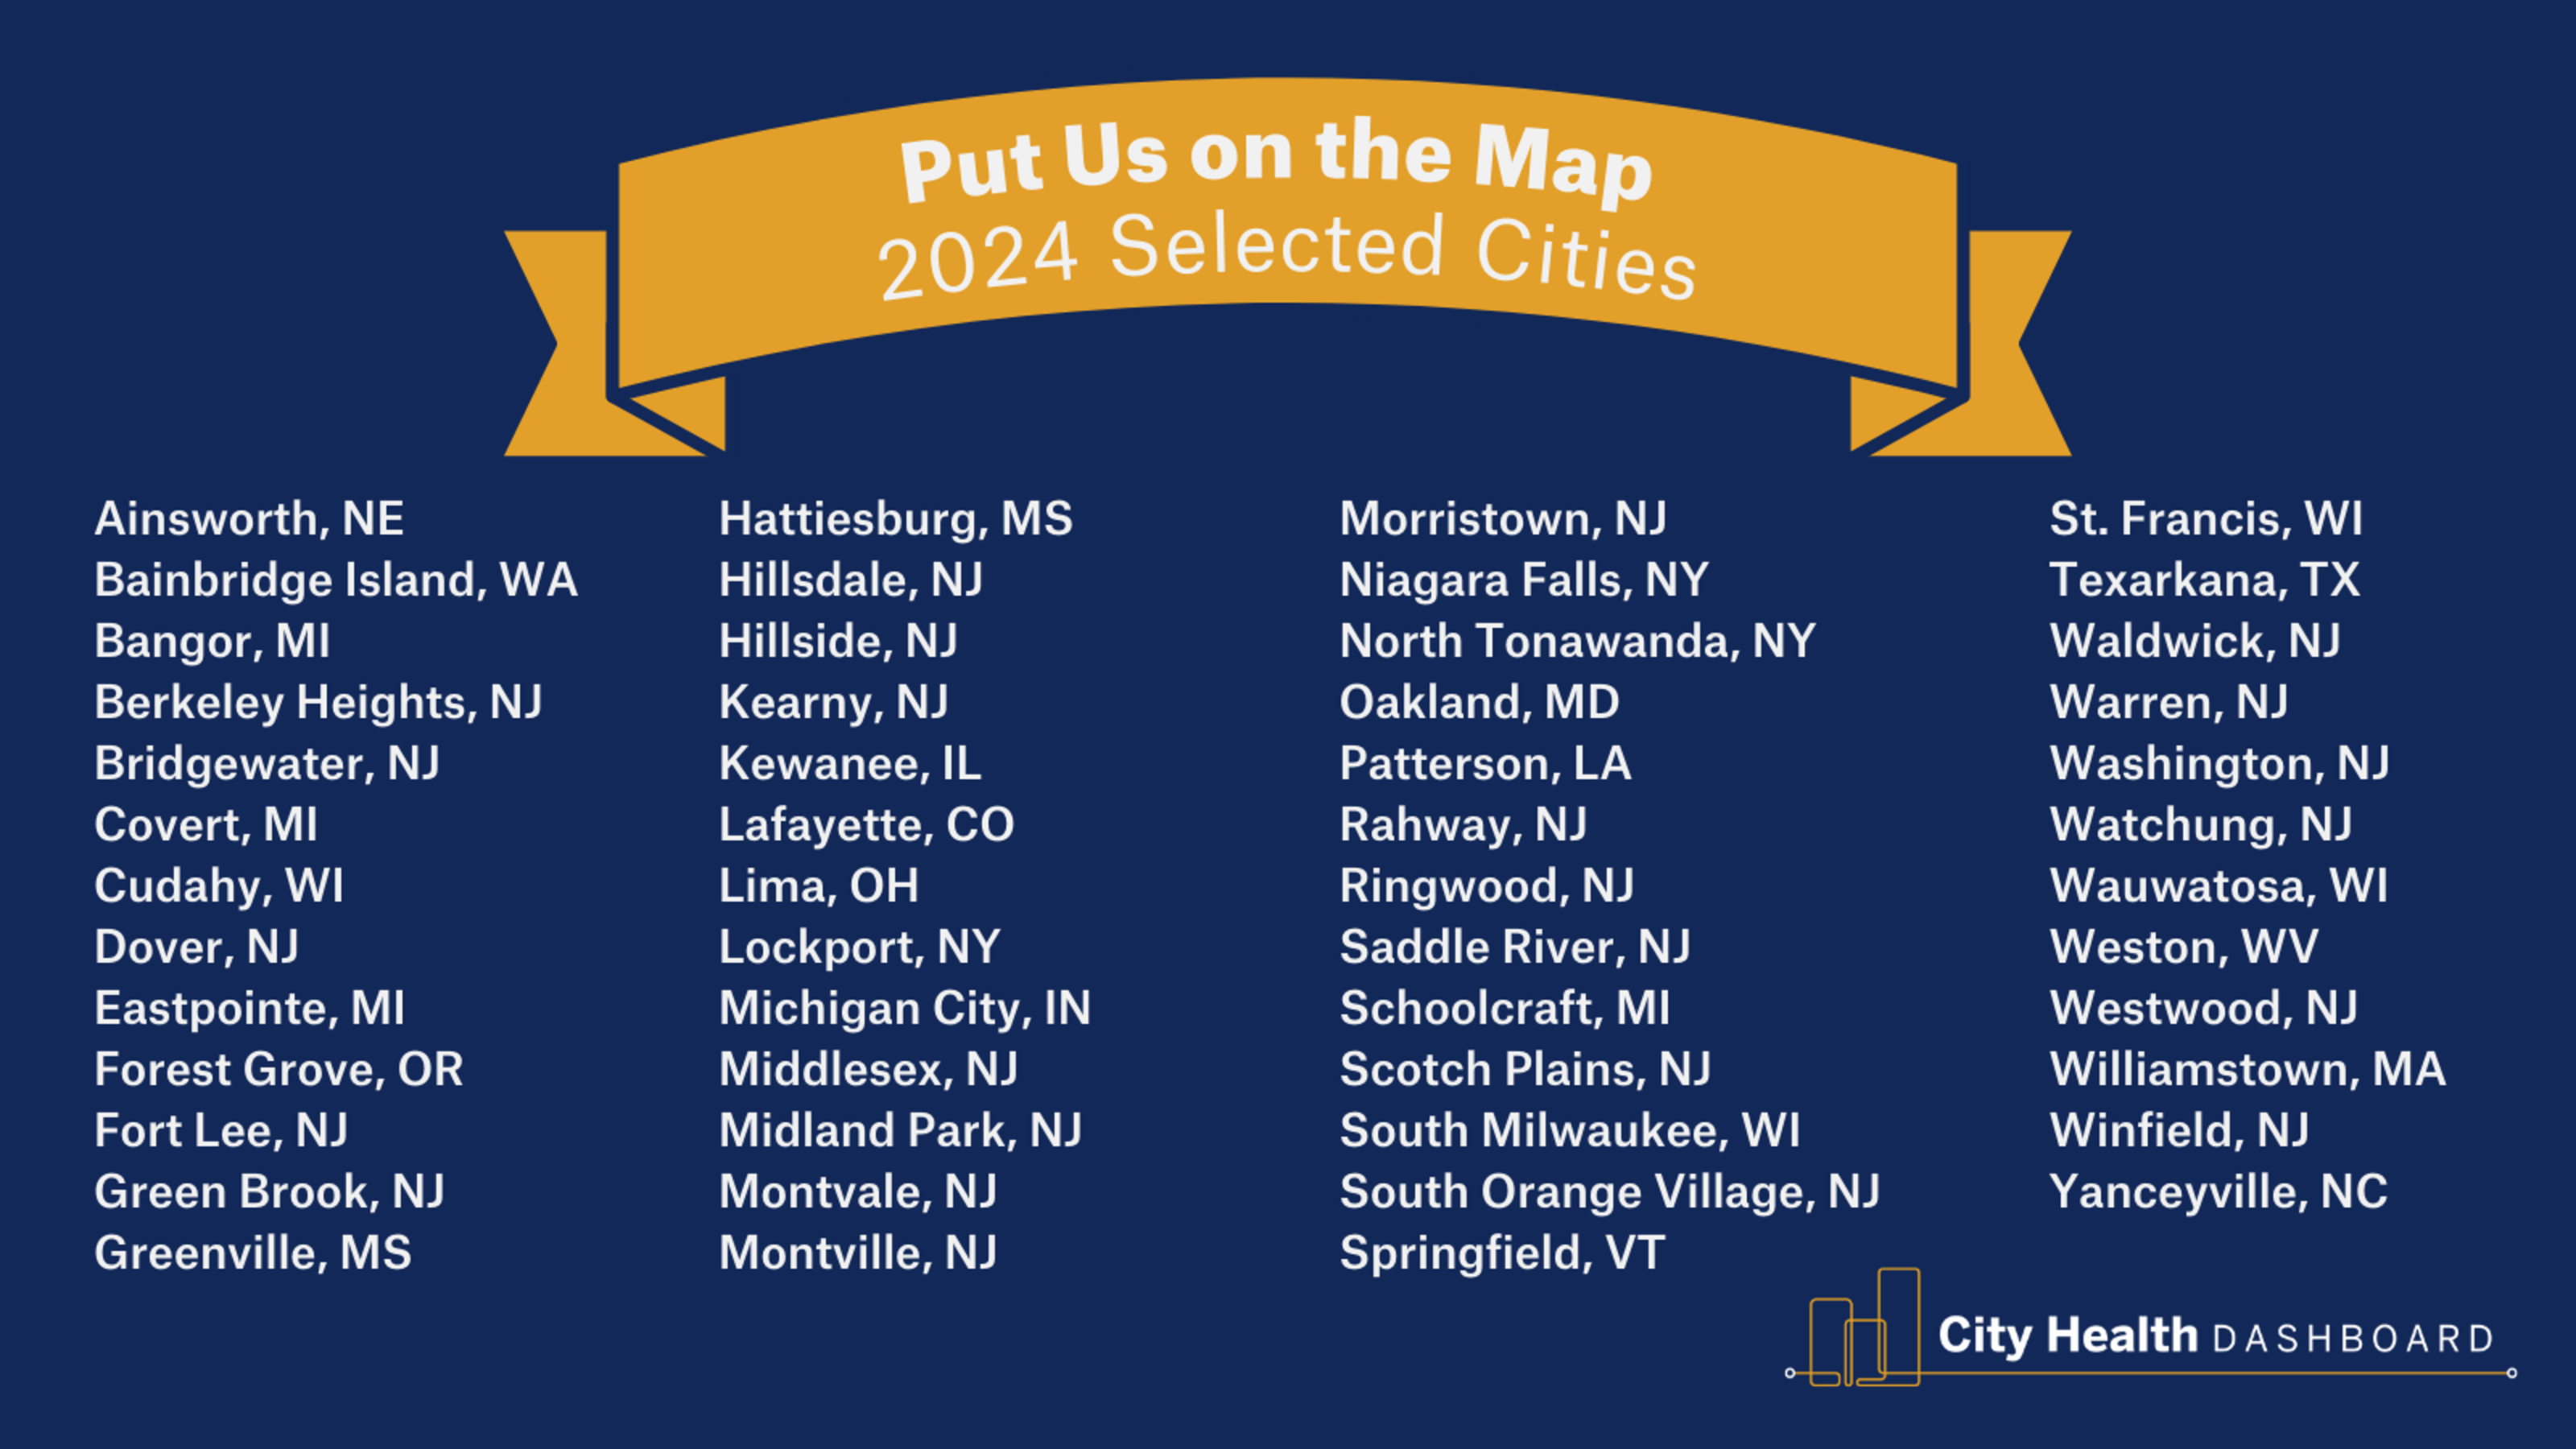 List of 2024 Put Us on the Map Selected Cities